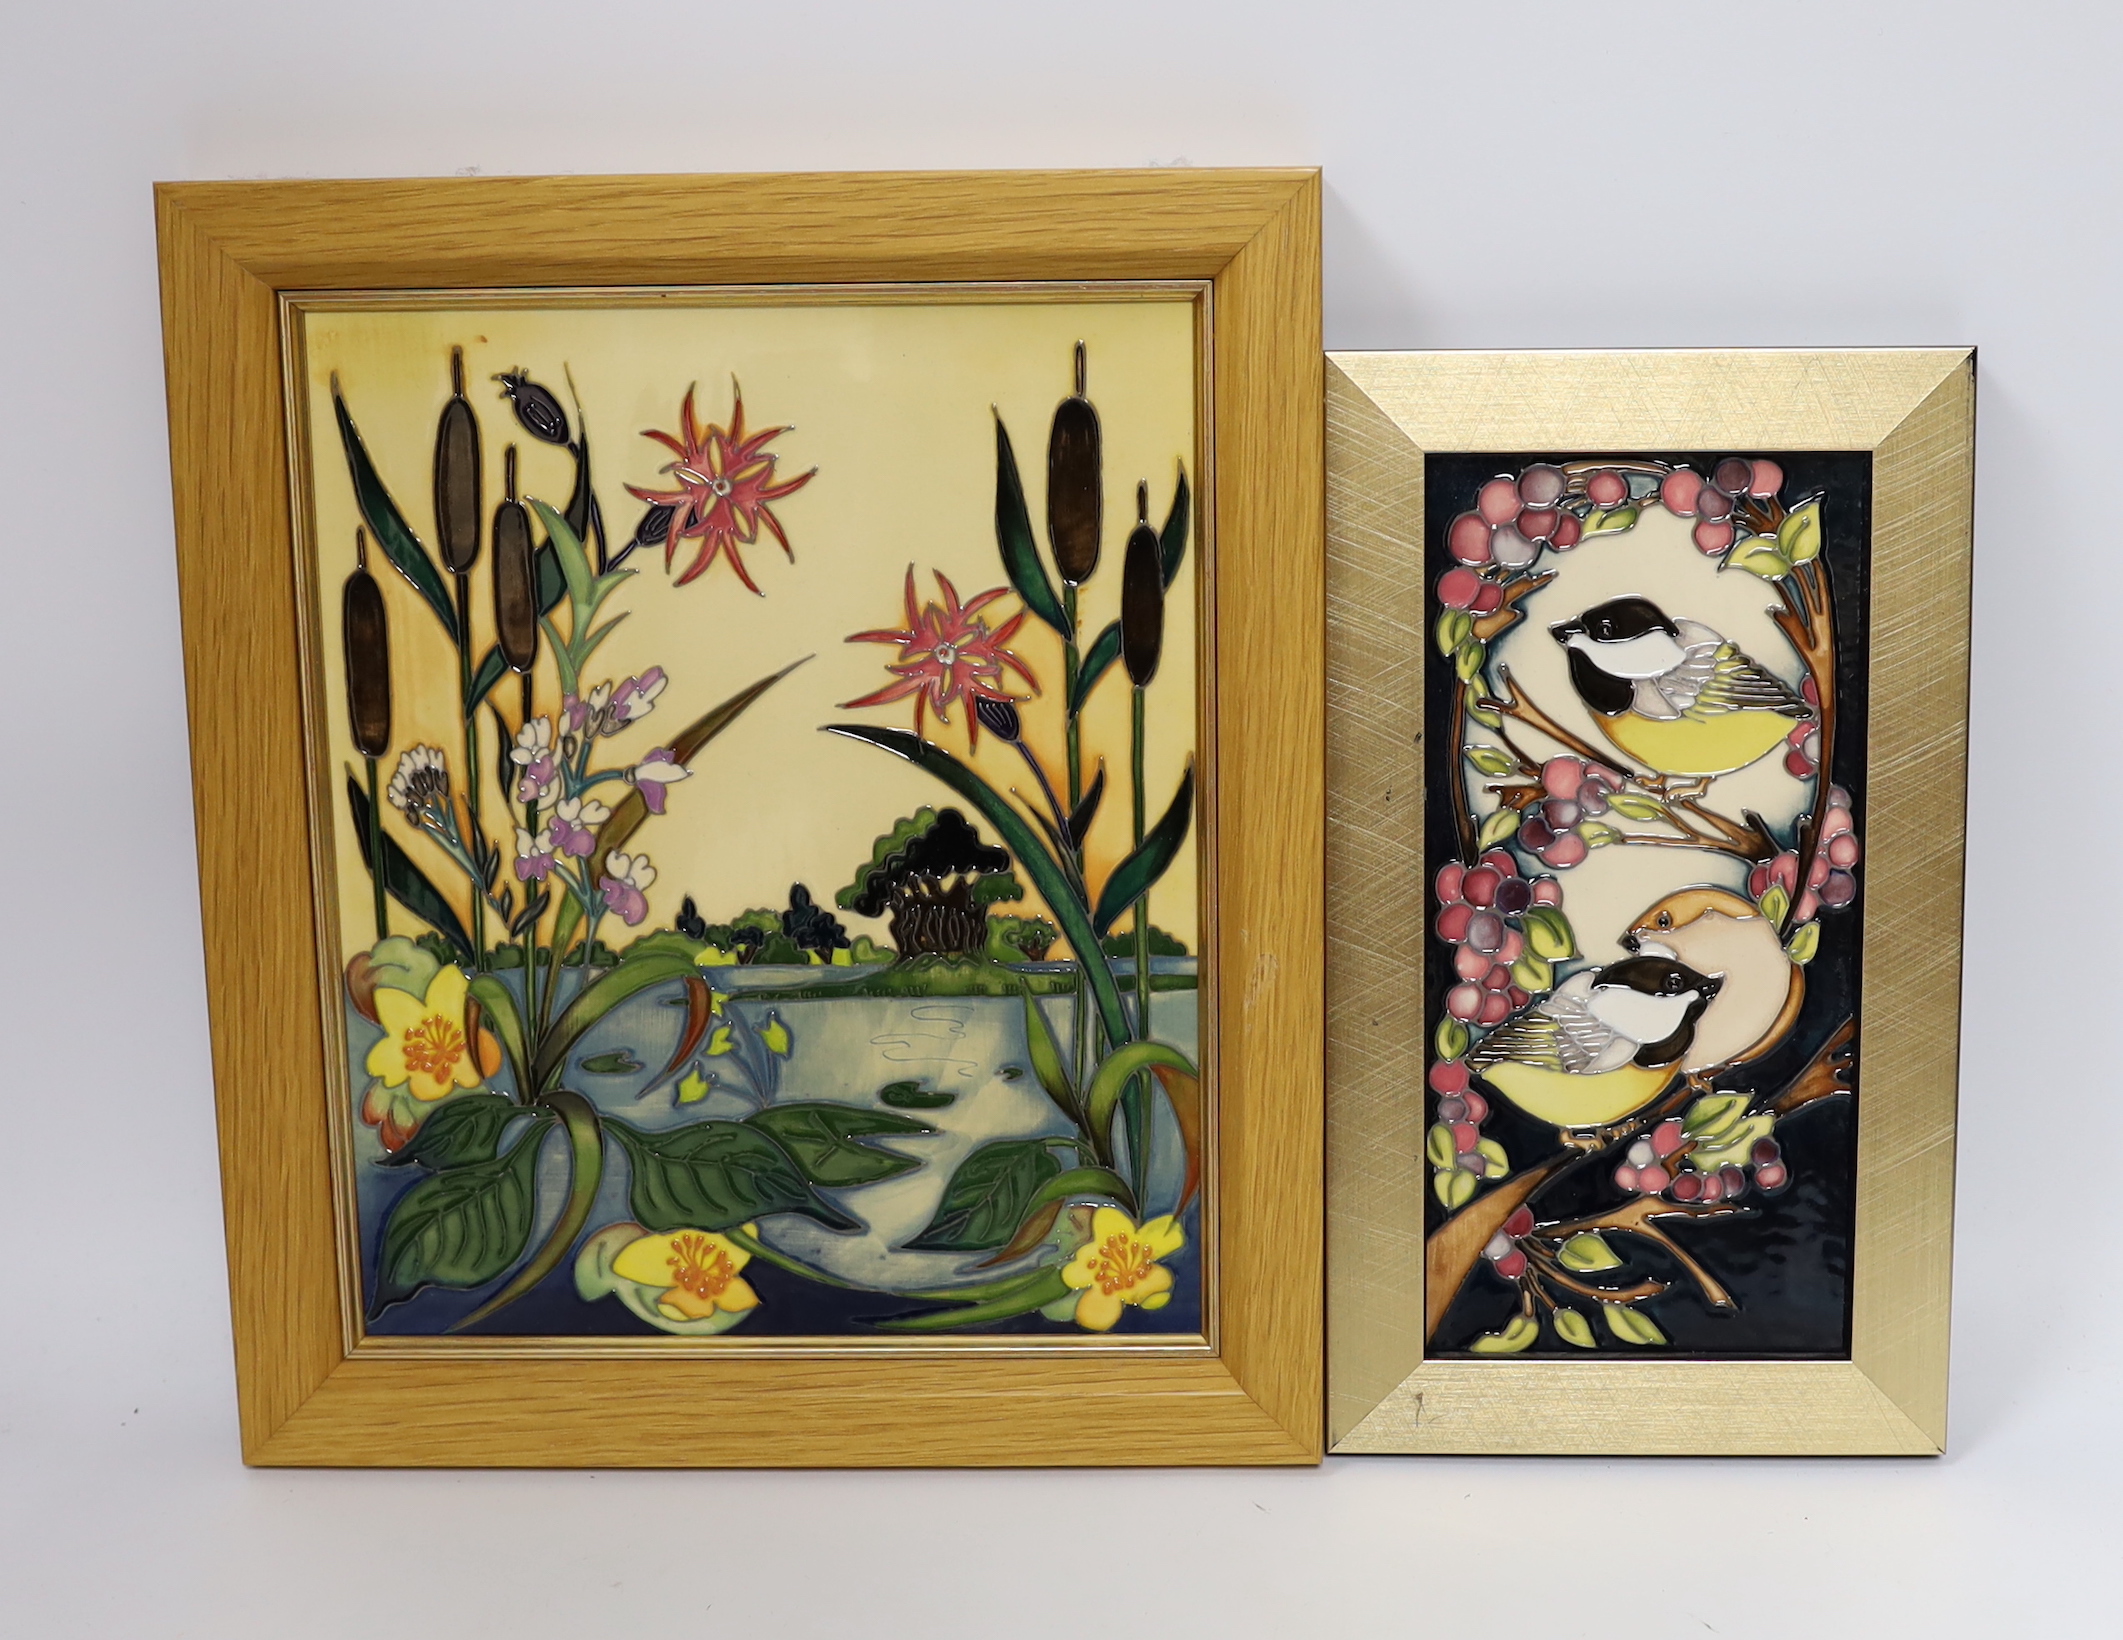 A Moorcroft Rachel Bishop wall plaque of bulrushes, another similar plaque and a signed print by Paul Hilditch, ‘A Vision of Windsor’, largest overall 60cm x 48cm